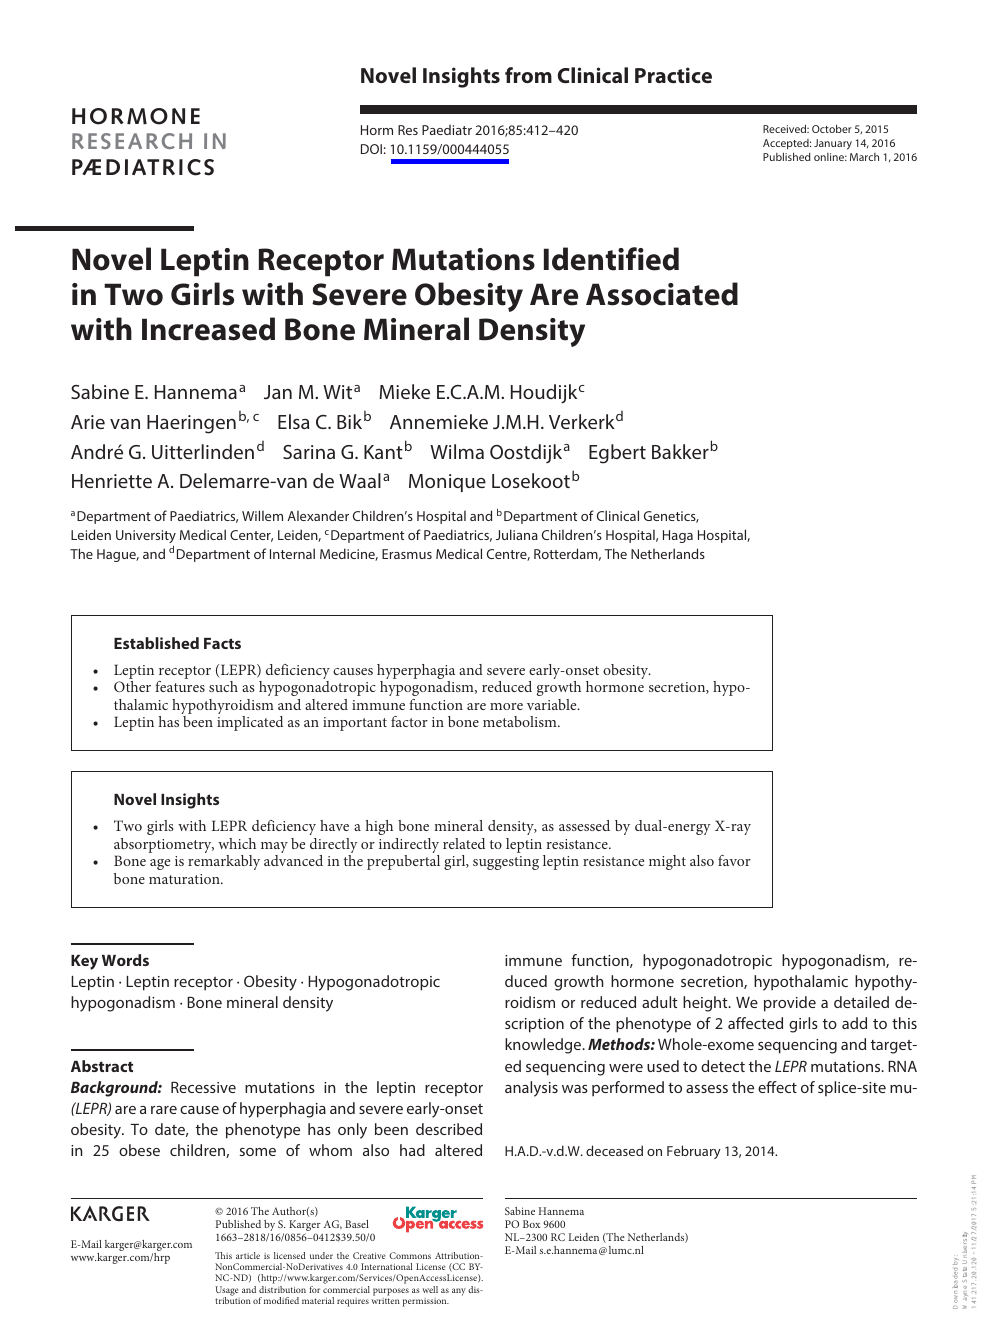 Novel Leptin Receptor Mutations Identified In Two Girls With Severe Obesity Are Associated With Increased Bone Mineral Density Topic Of Research Paper In Clinical Medicine Download Scholarly Article Pdf And Read